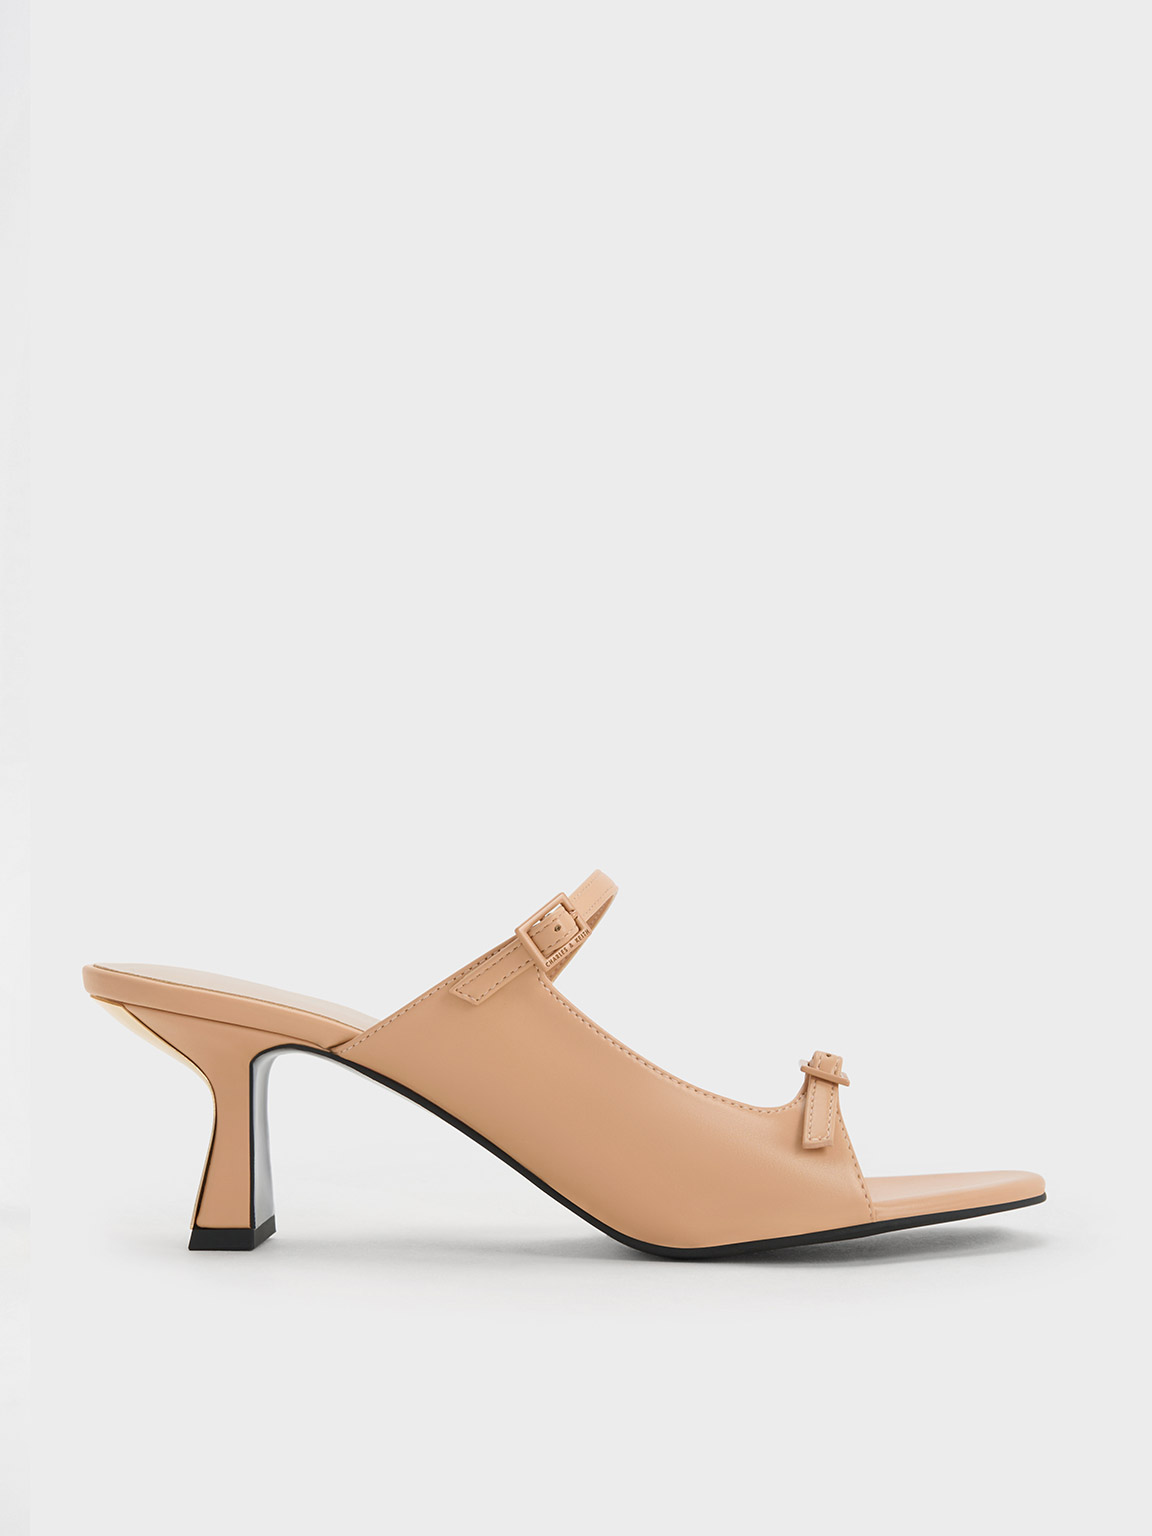 CHARLES & KEITH Woven Buckle Slingback Heeled Pumps in Chalk | Endource